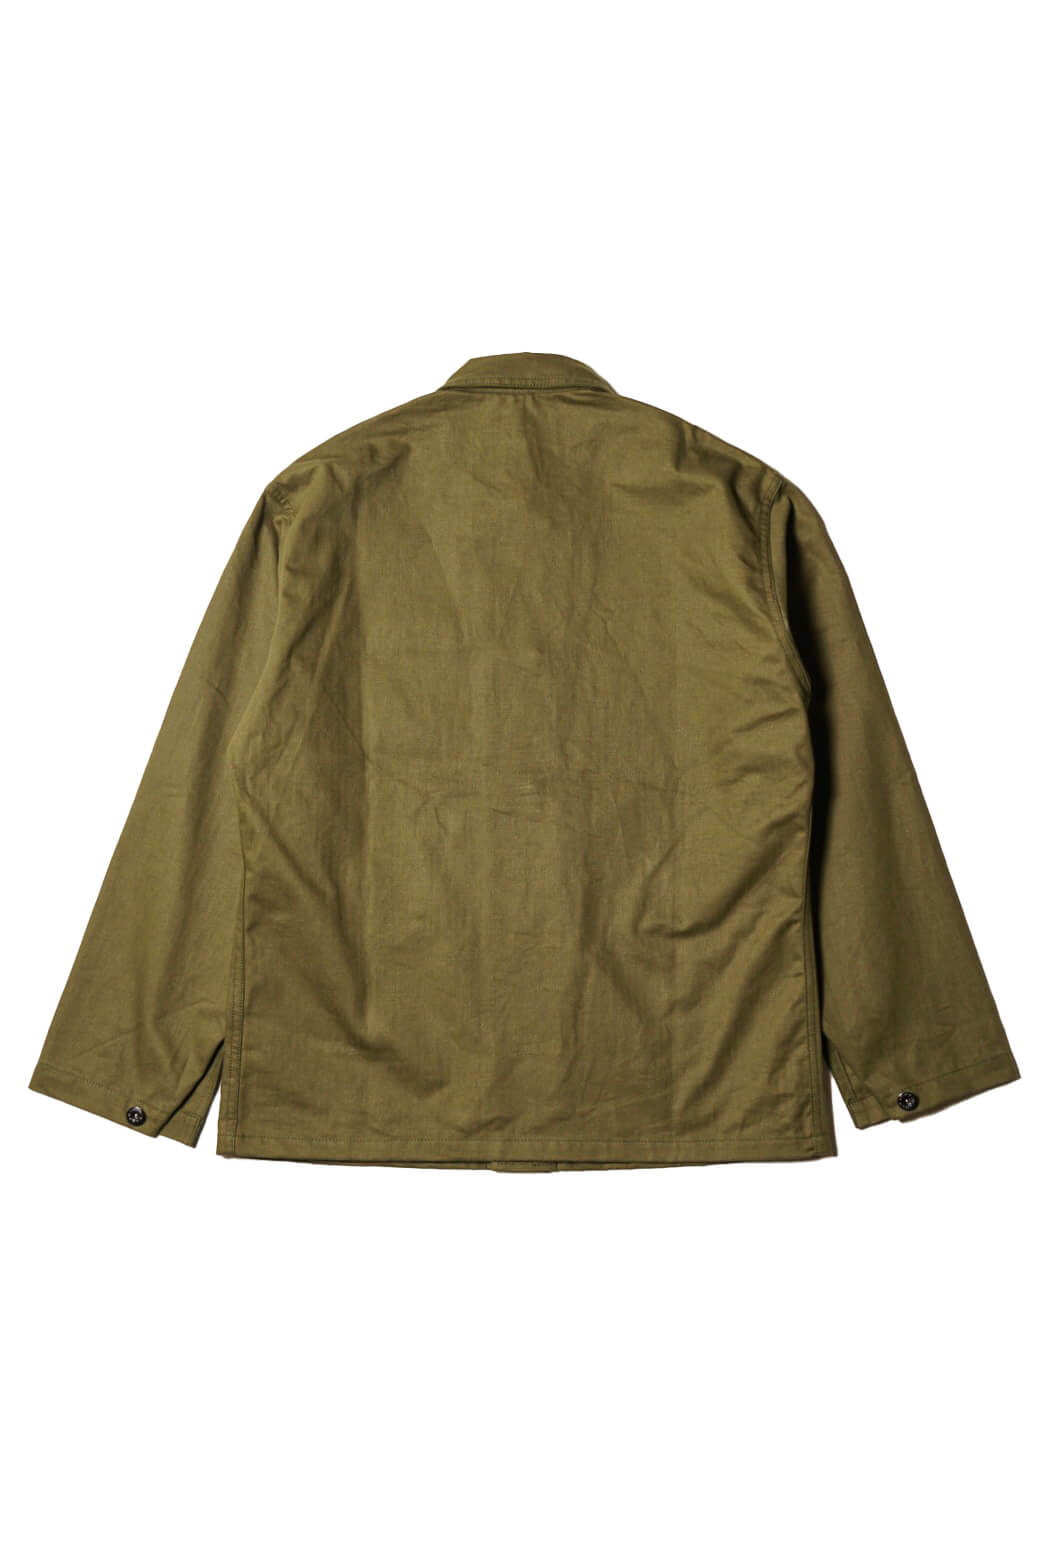 N-3 JACKET - MADE IN USA